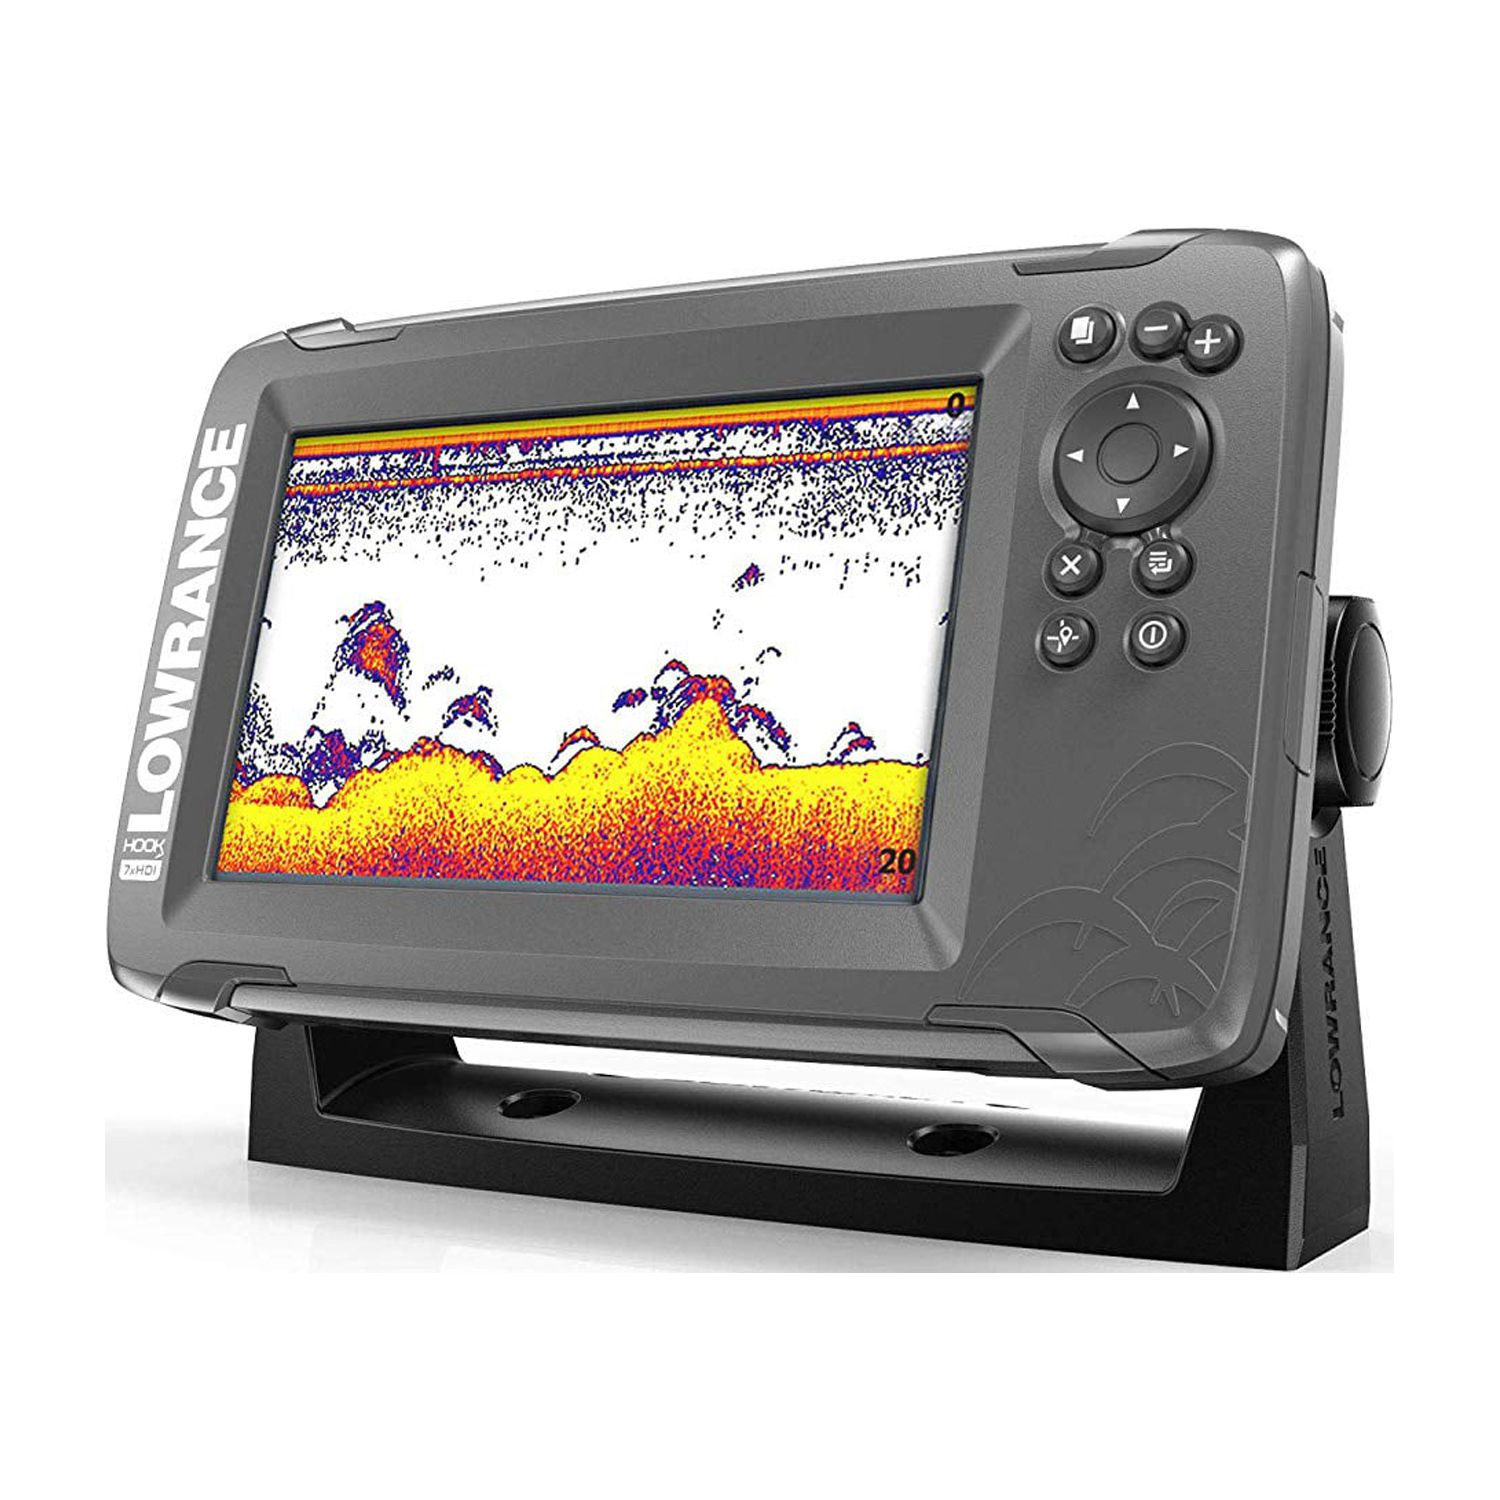 Lowrance HOOK2 7X 7 In. Fishfinder with Split Shot Transducer and GPS Plotter - image 2 of 4